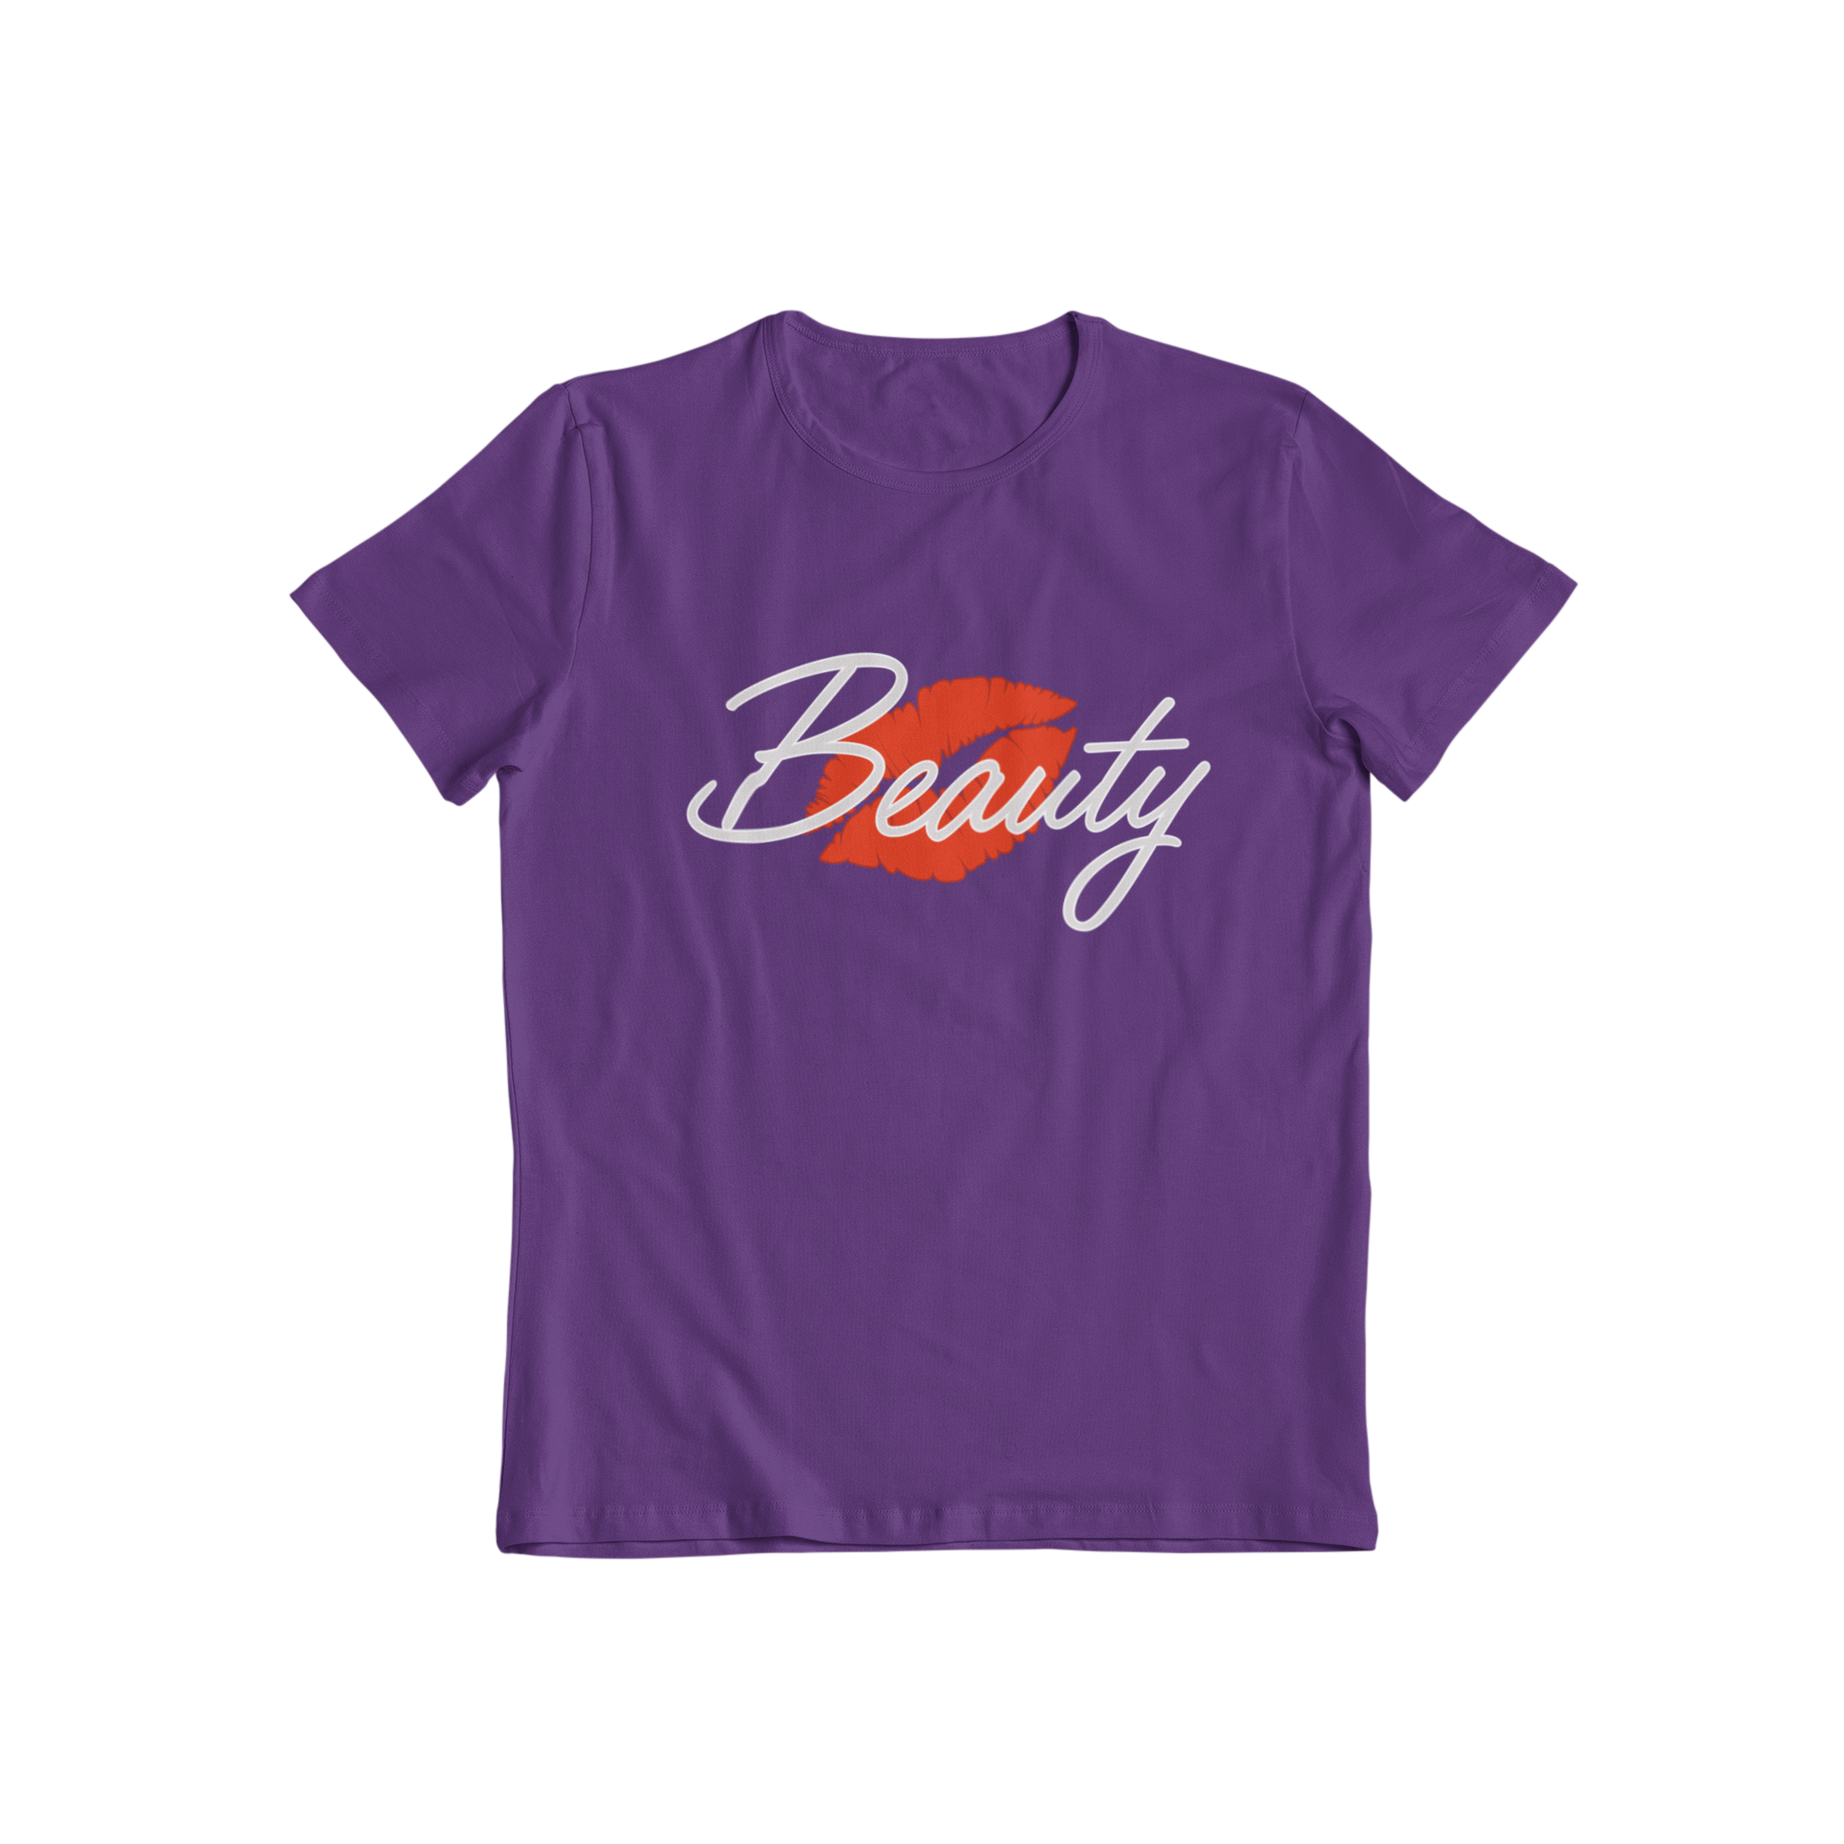 This matching t-shirt is inspired by the movie "Beauty and the Beast" and features a simple yet elegant design. Perfect for any fan of the classic fairy tale, this t-shirt combines style with a touch of nostalgia. Show off your love for the story of beauty and embrace your inner princess with this beauty t-shirt.